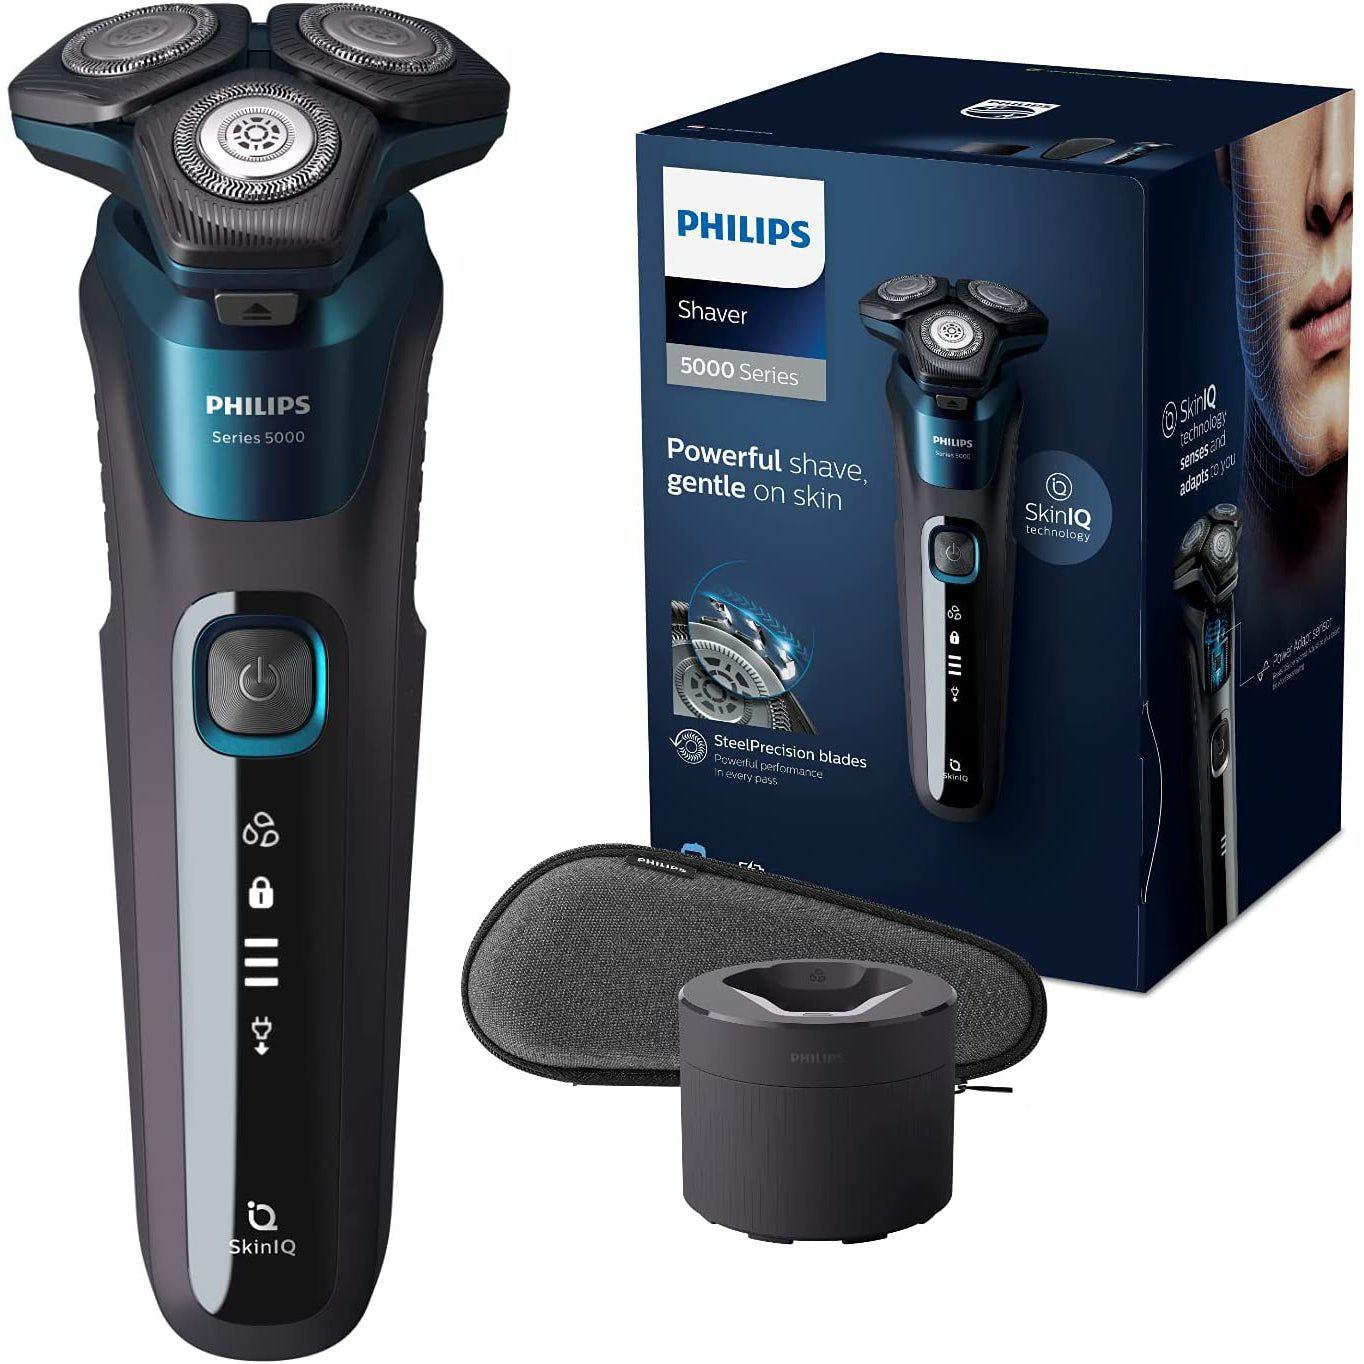 Philips Series 5000 Wet and Dry Electric Shaver S5579/50 with Cleaning Pod & SkinIQ Technology - Healthxpress.ie